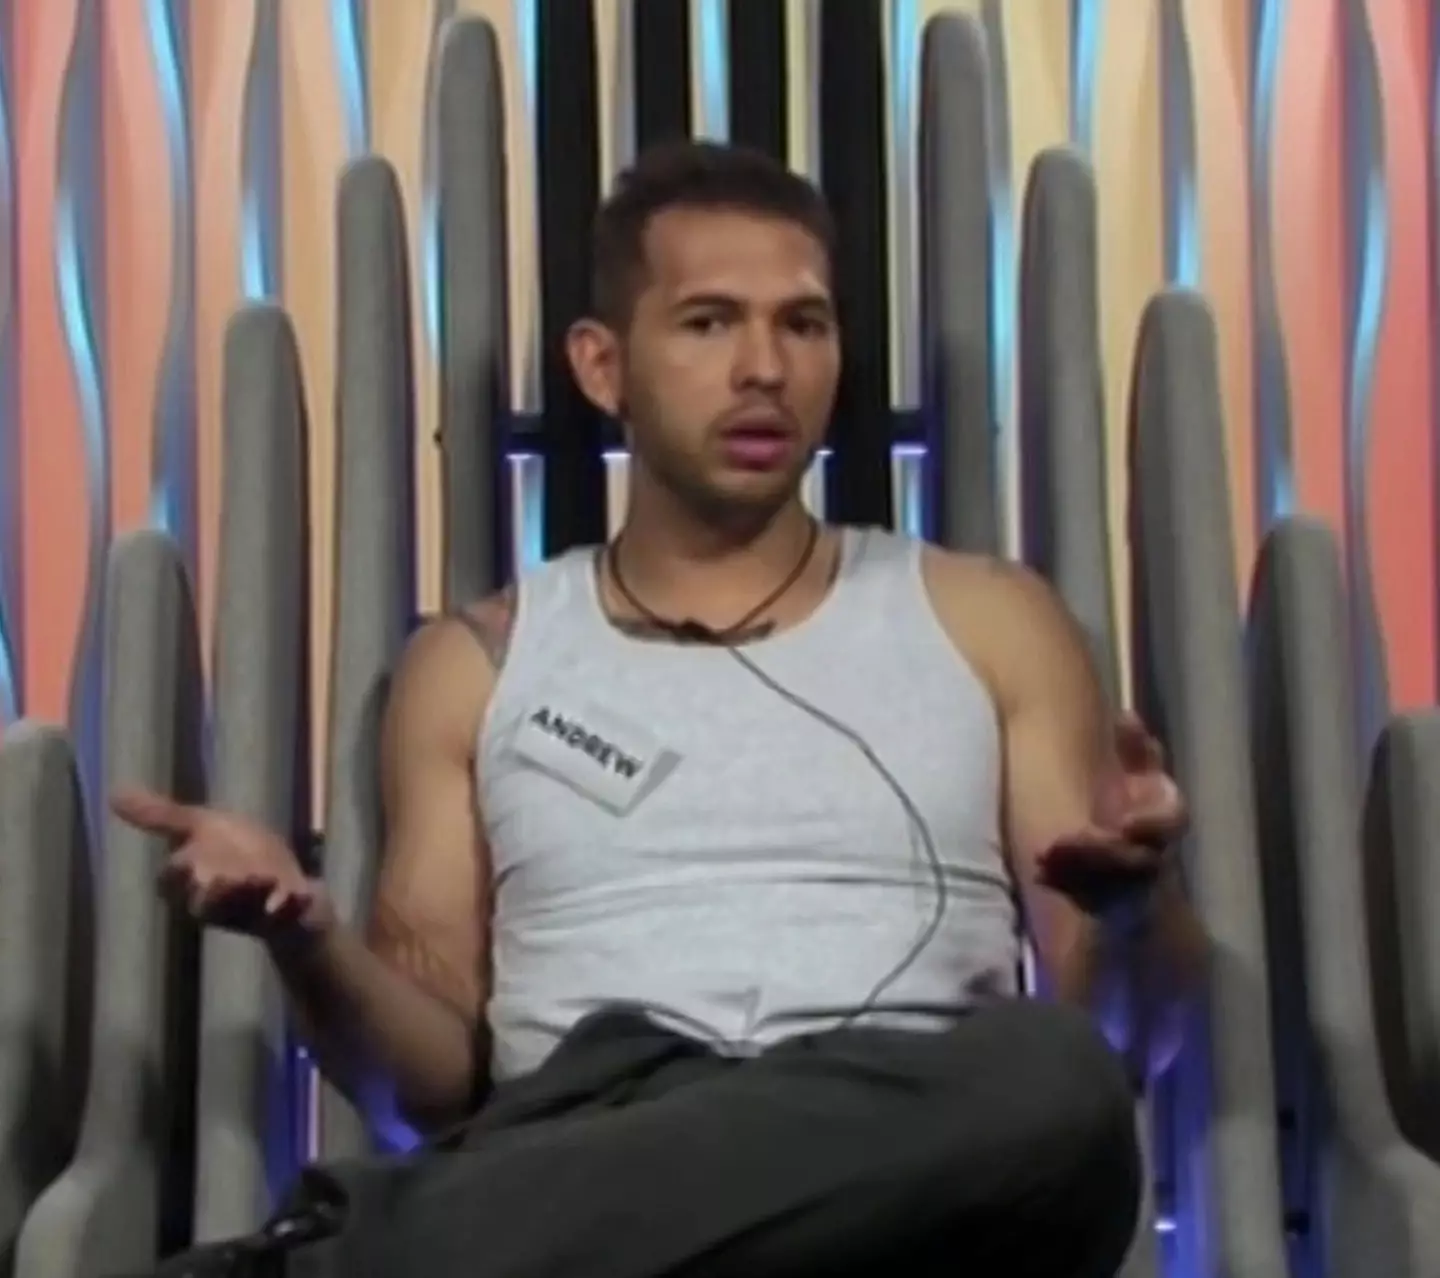 Andrew Tate was a contestant on Big Brother back in 2016.